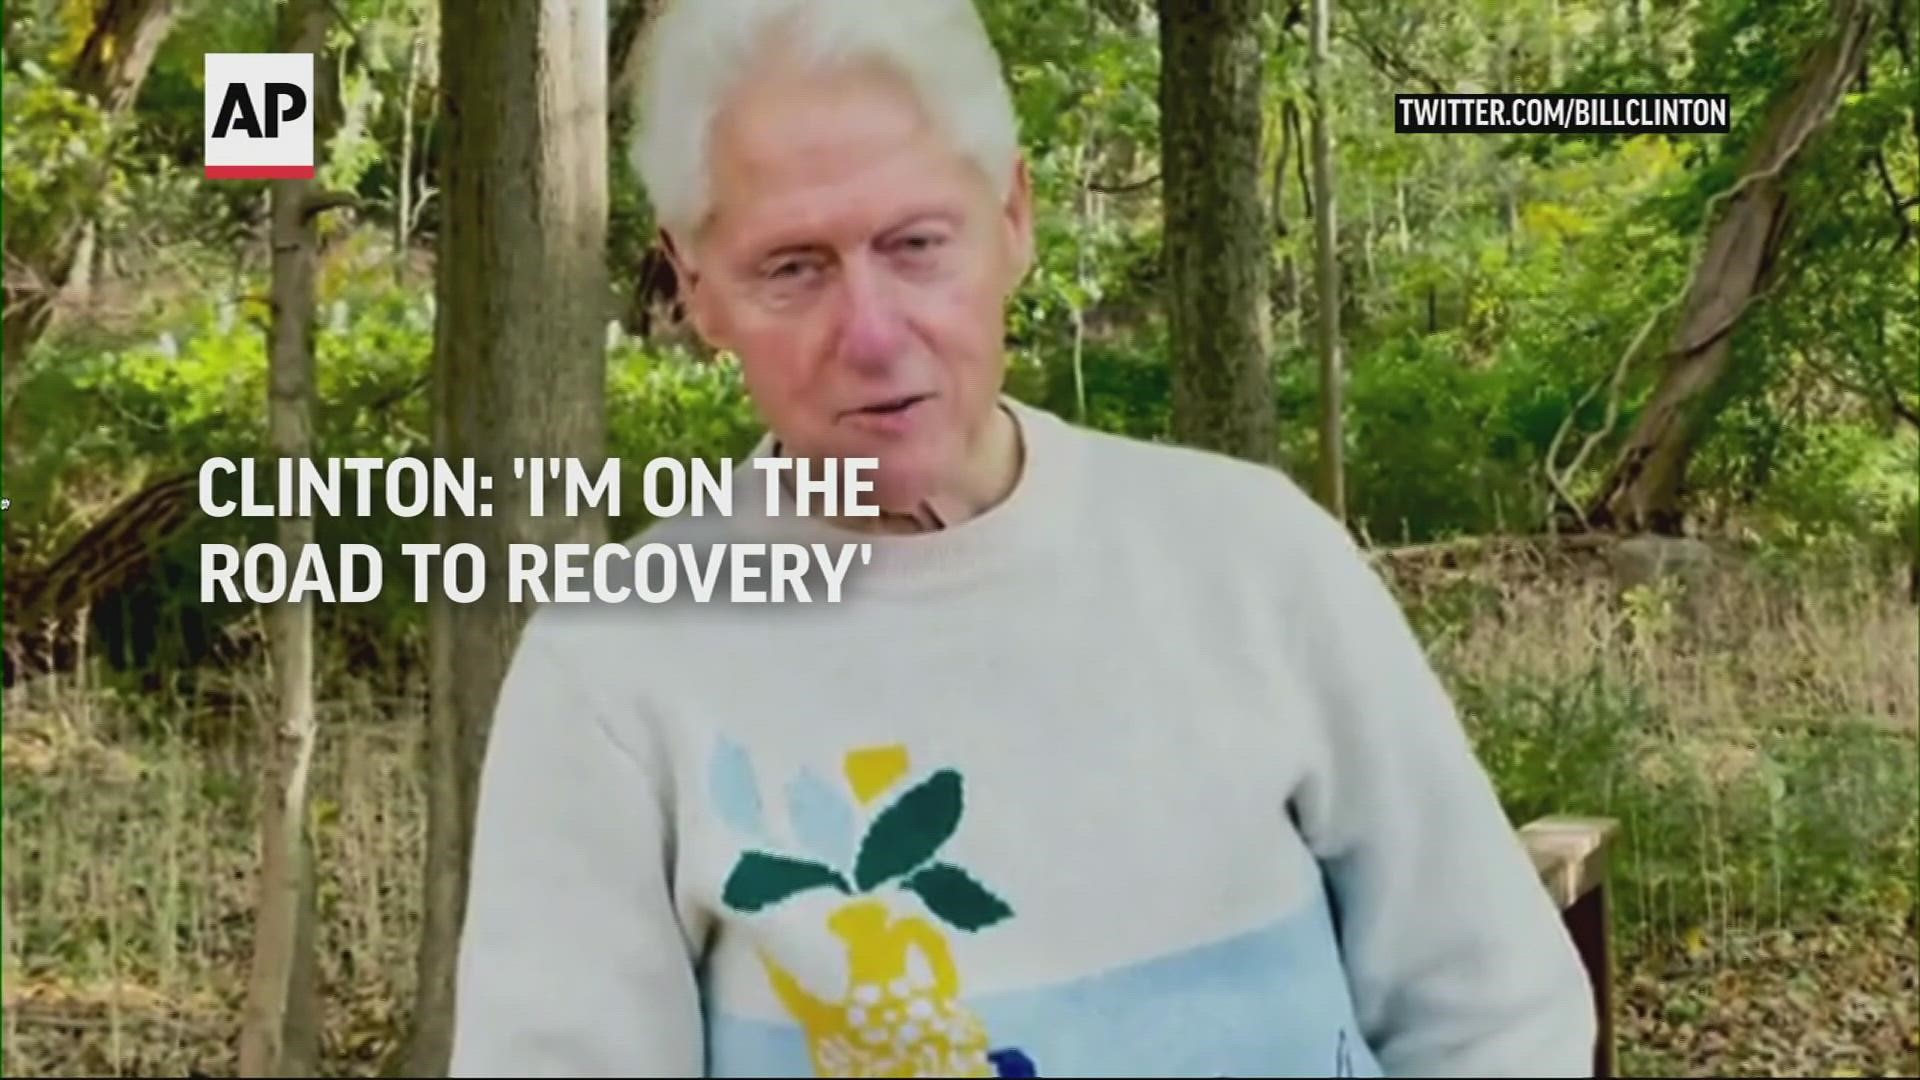 Former President Bill Clinton released a video Wednesday, saying he is on the road to recovery after being hospitalized for six days.